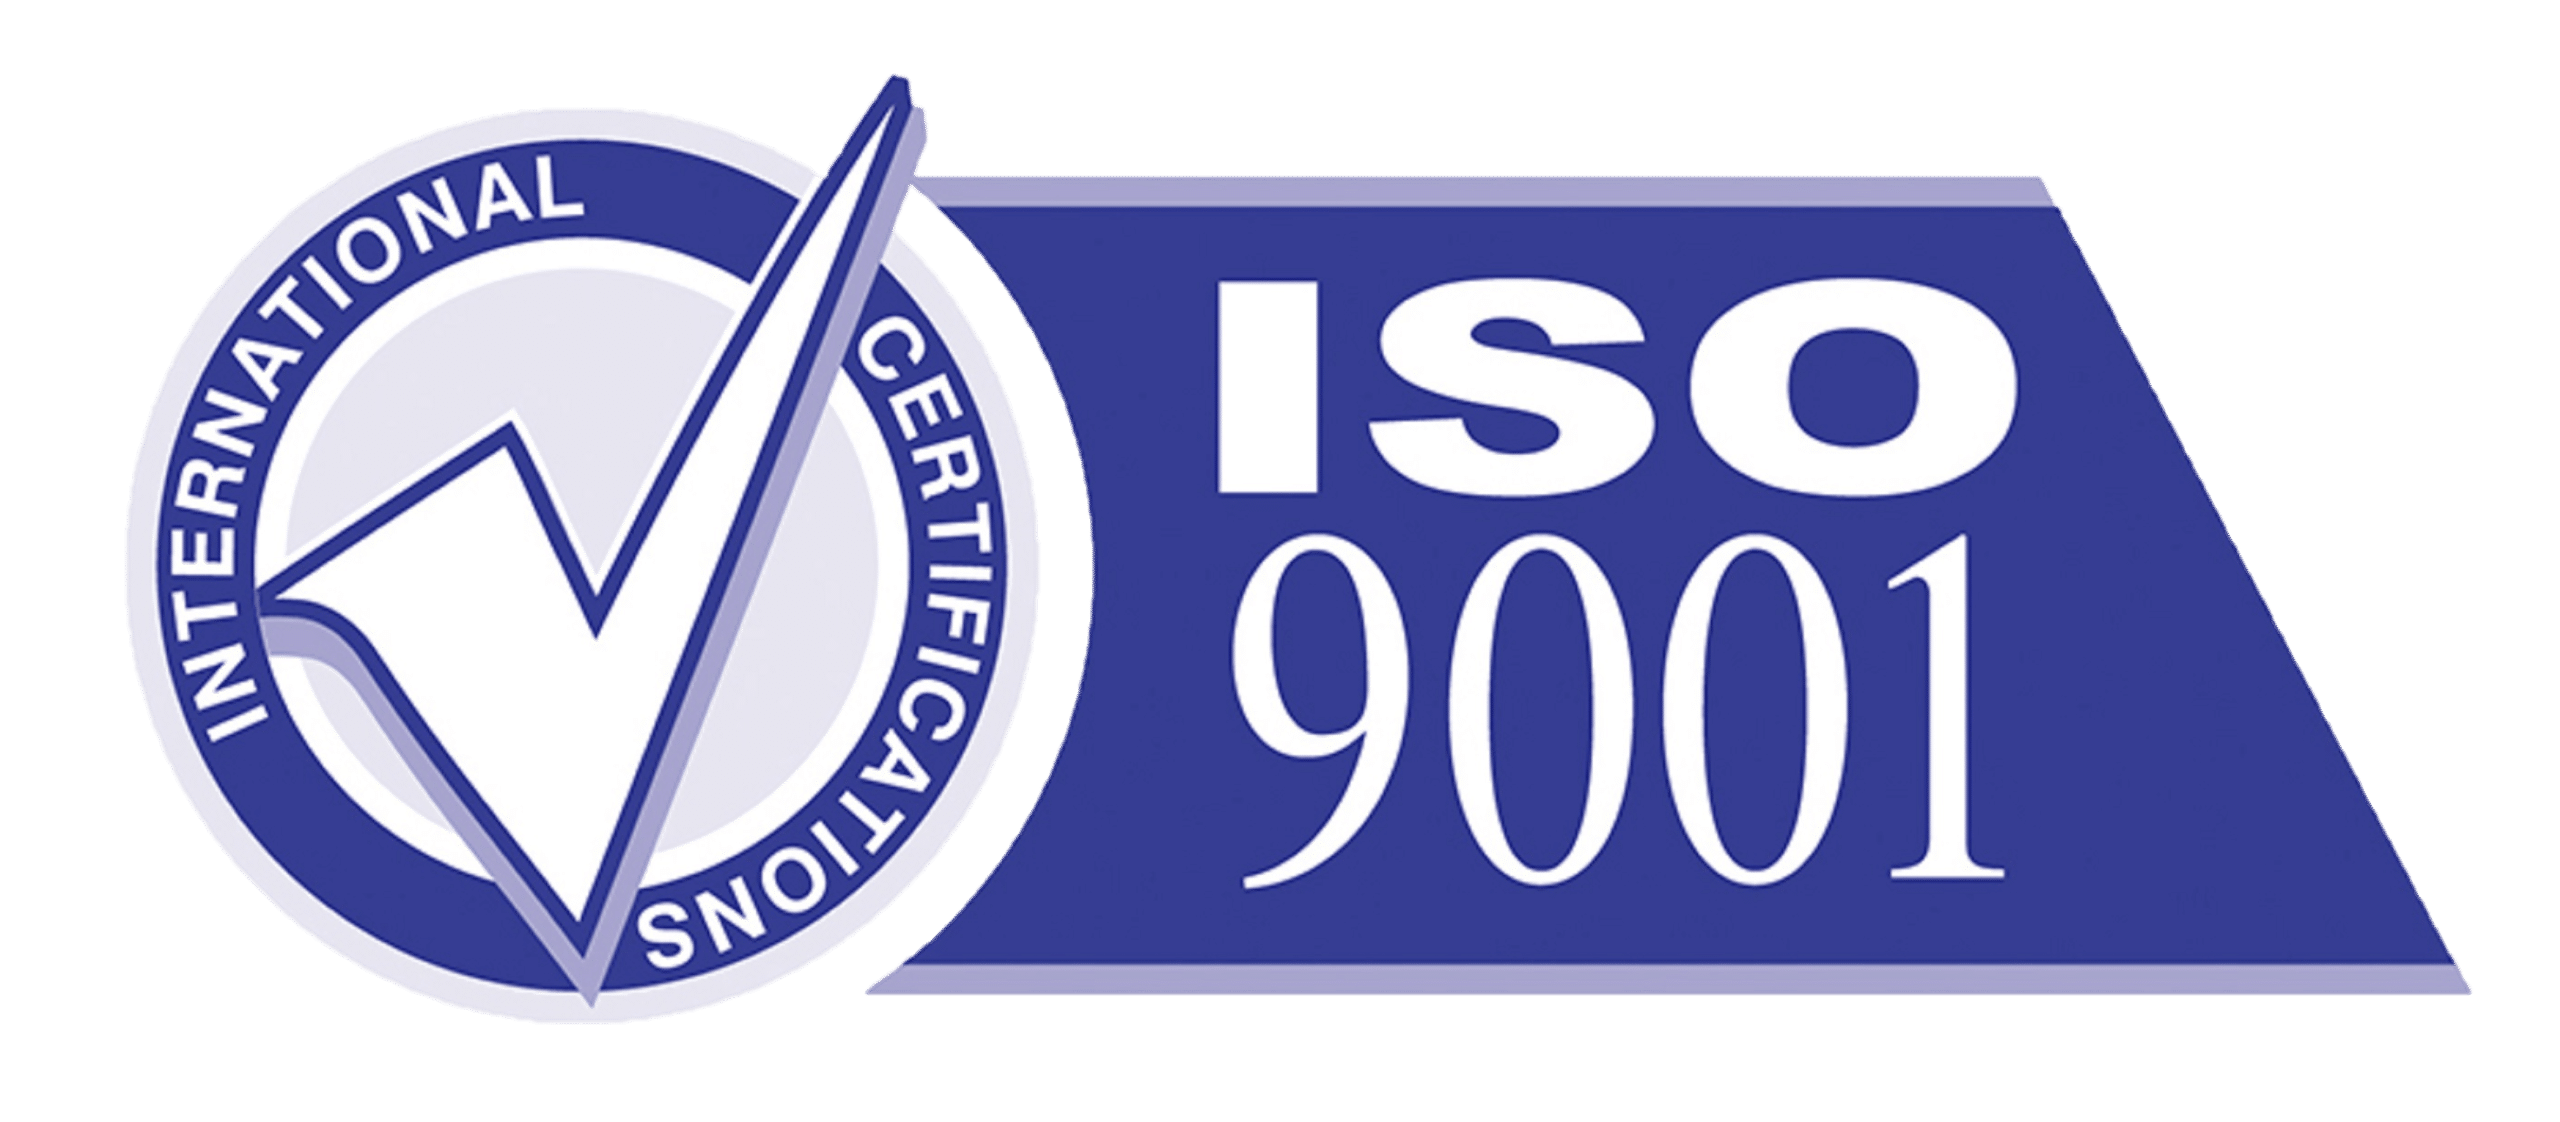 <br><br><br>ISO 9001